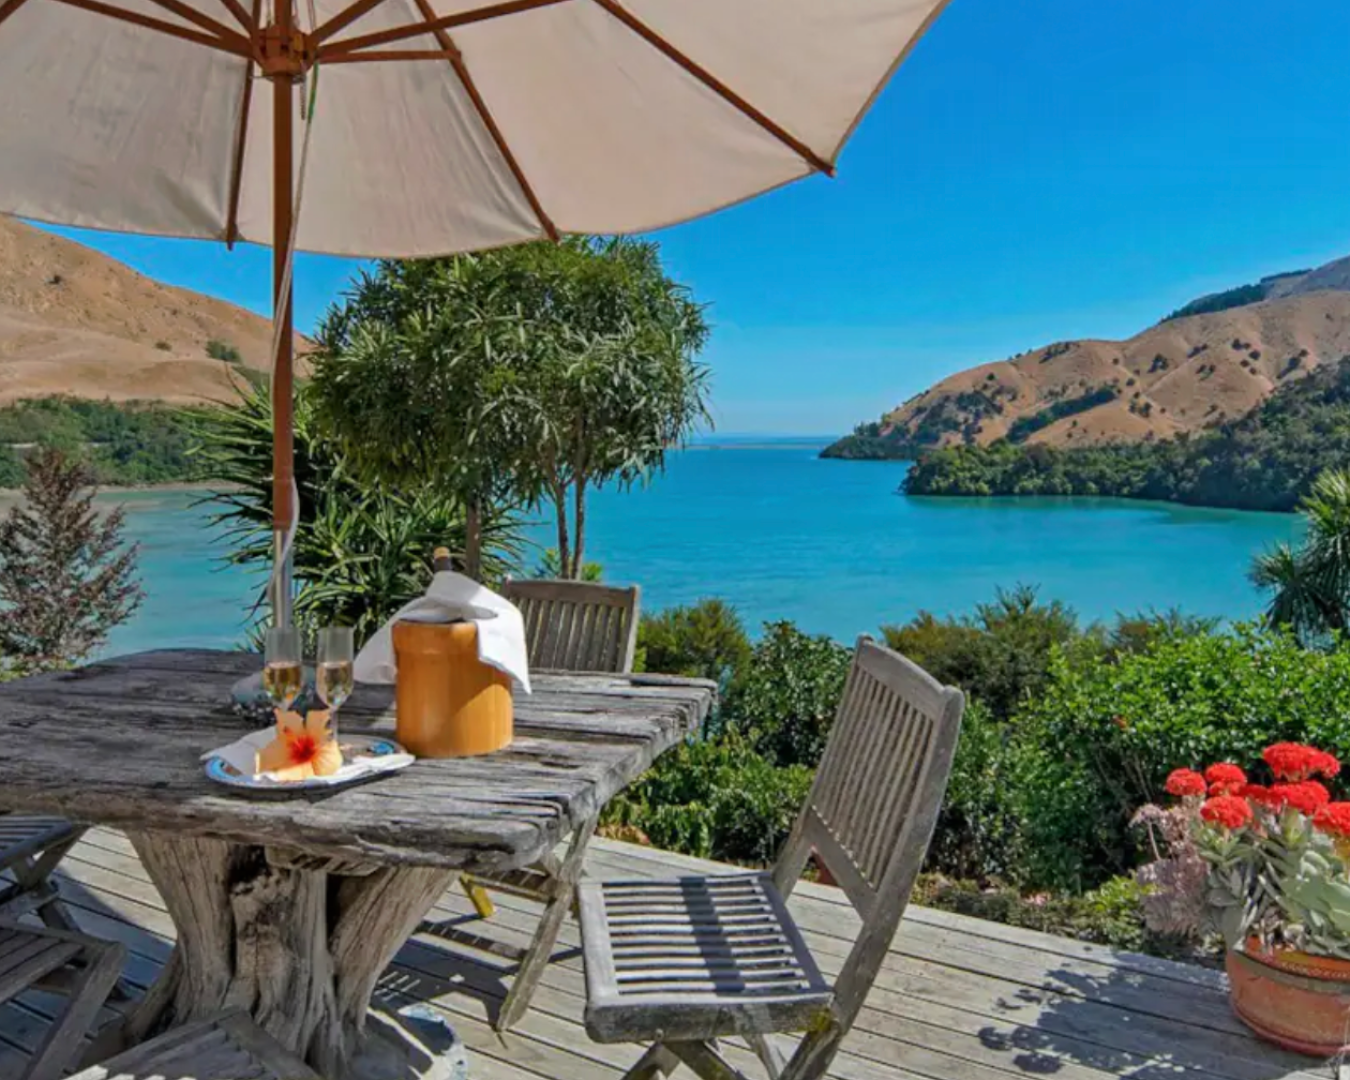 Outdoor table and chairs on deck with stunning views of the sea in Nelson